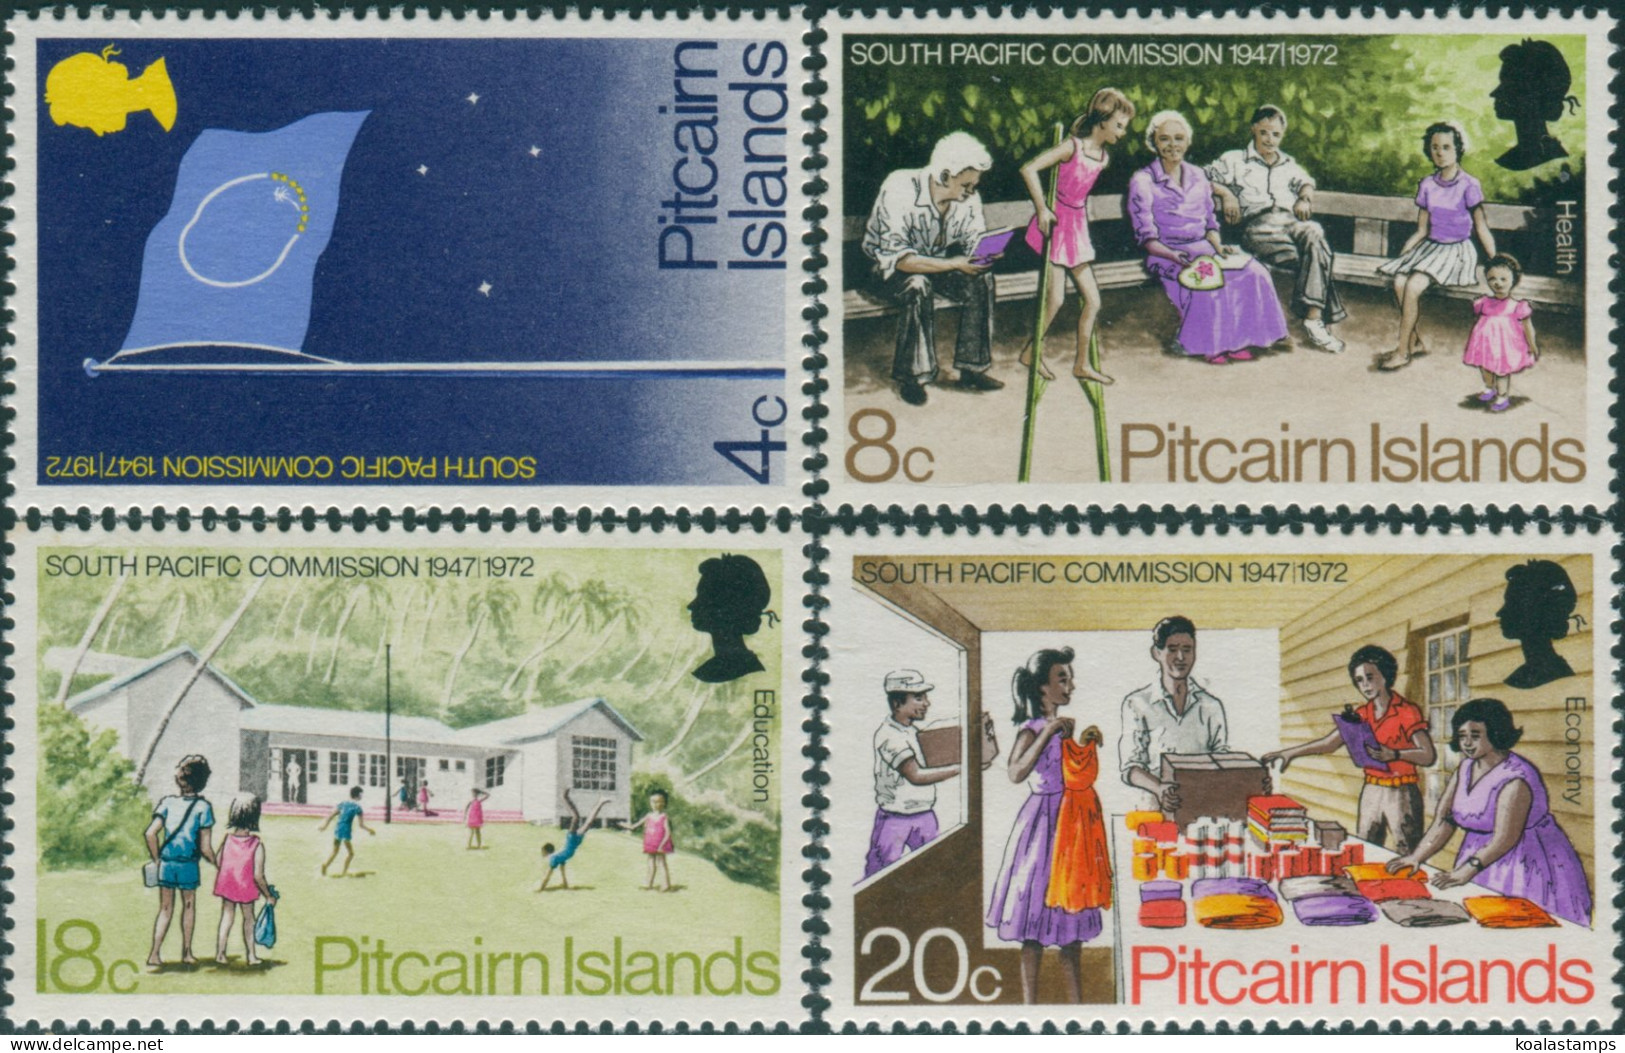 Pitcairn Islands 1972 SG120-123 South Pacific Commission Set MNH - Pitcairn Islands